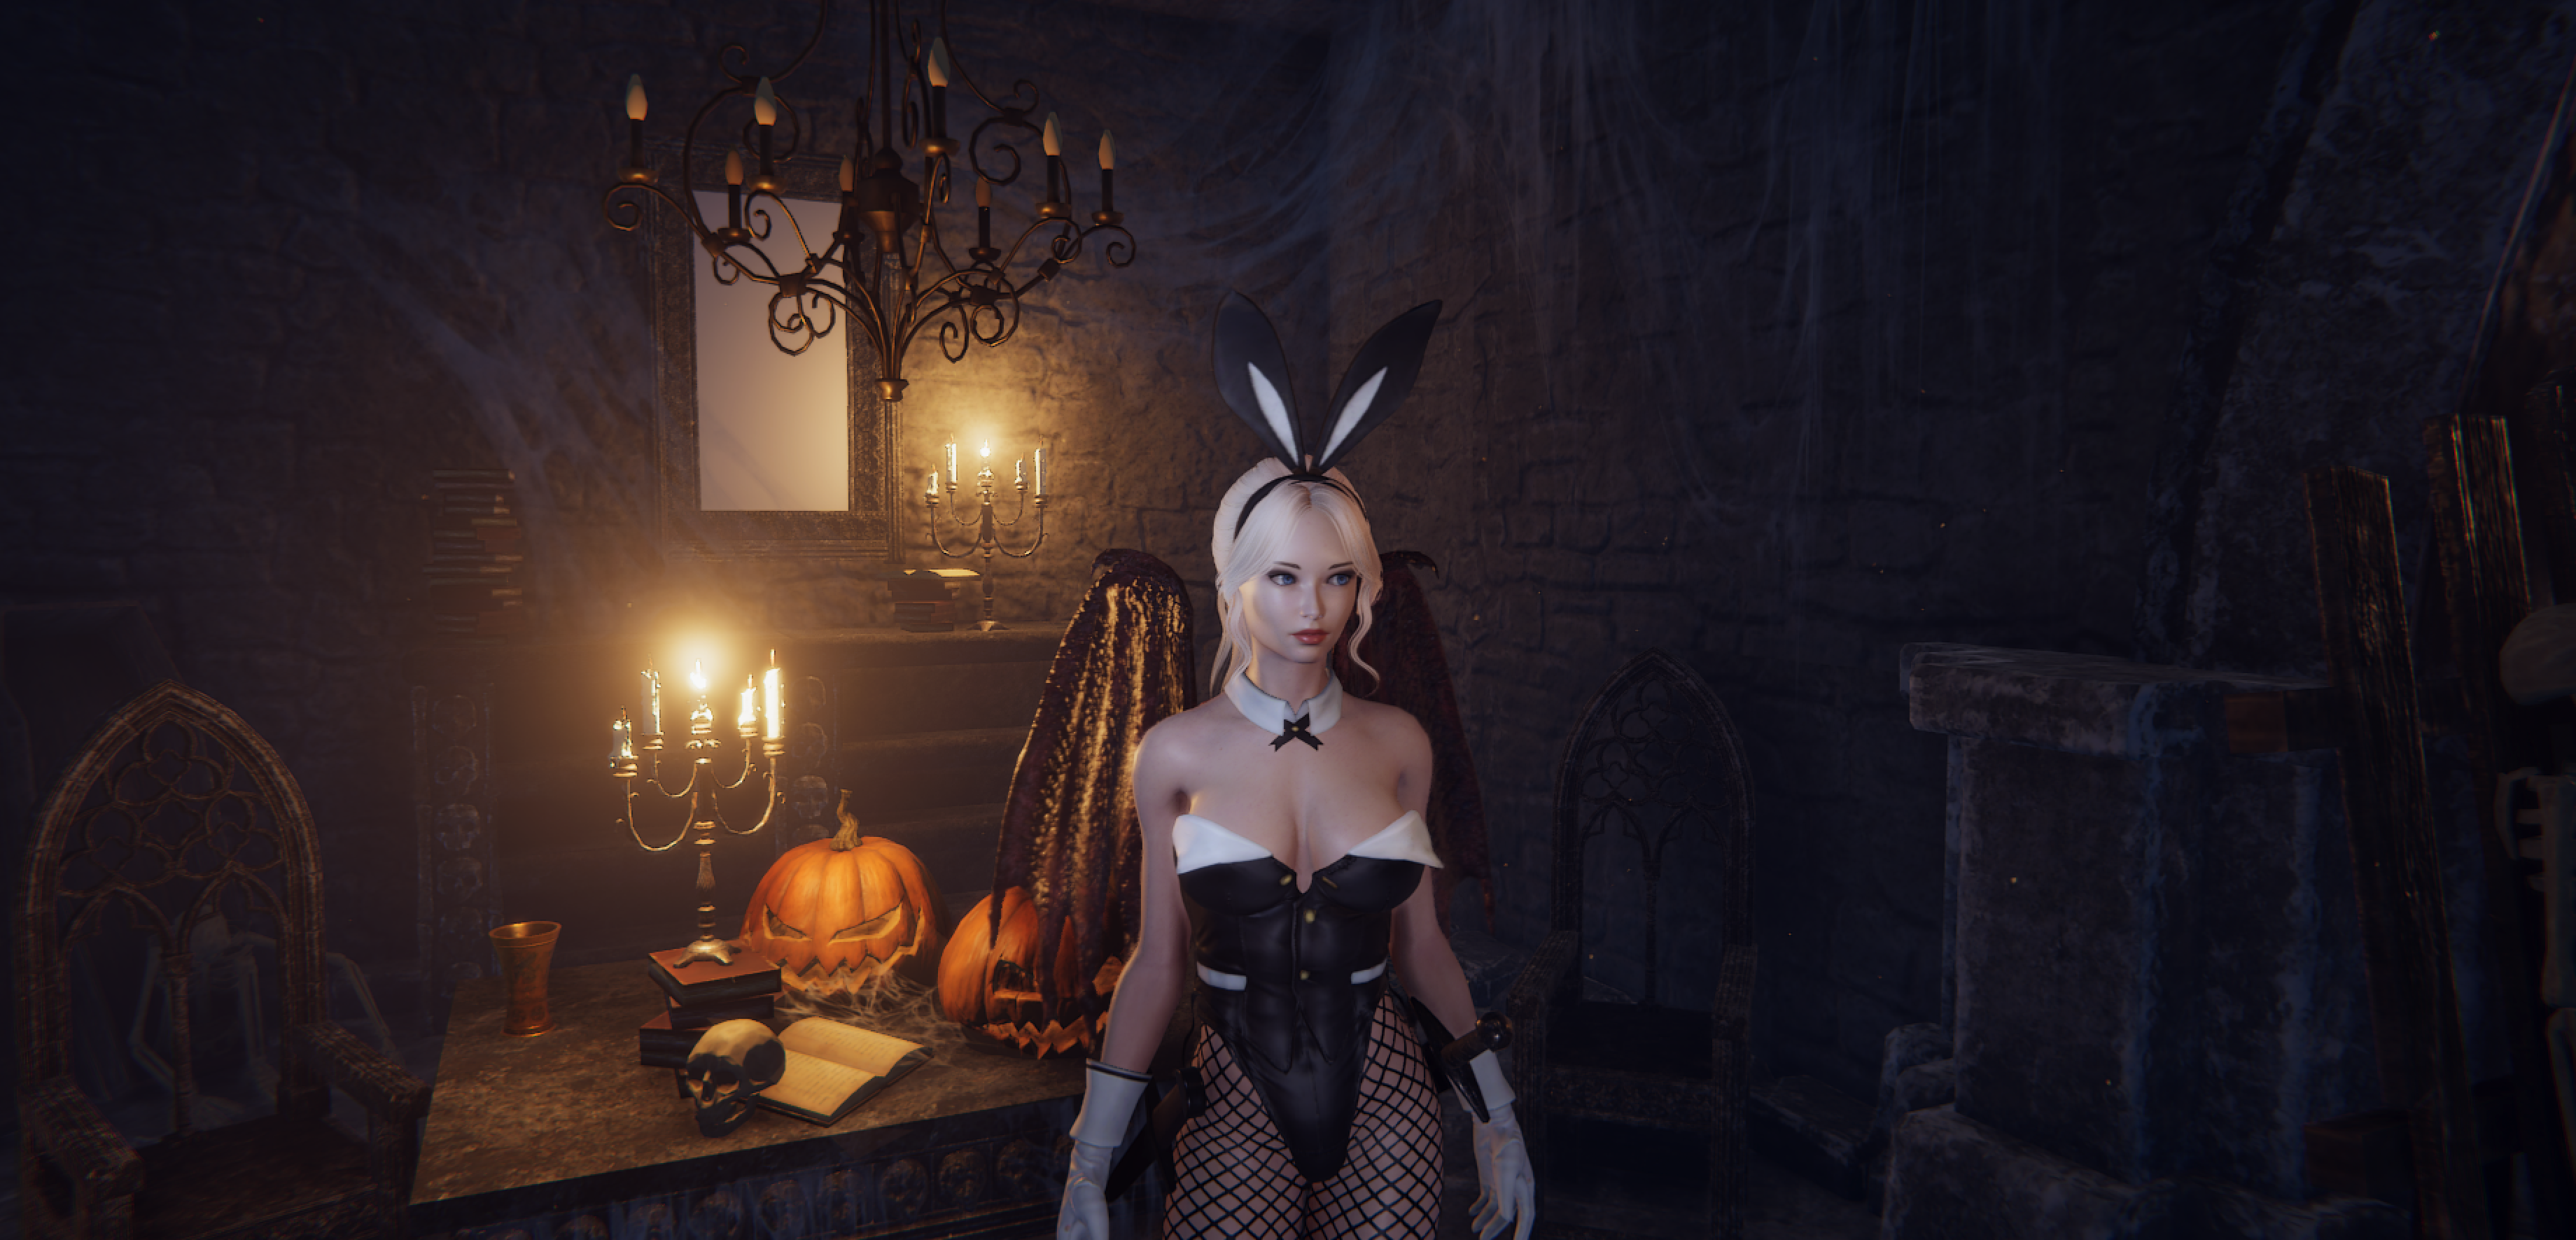 swpt bunny outfit